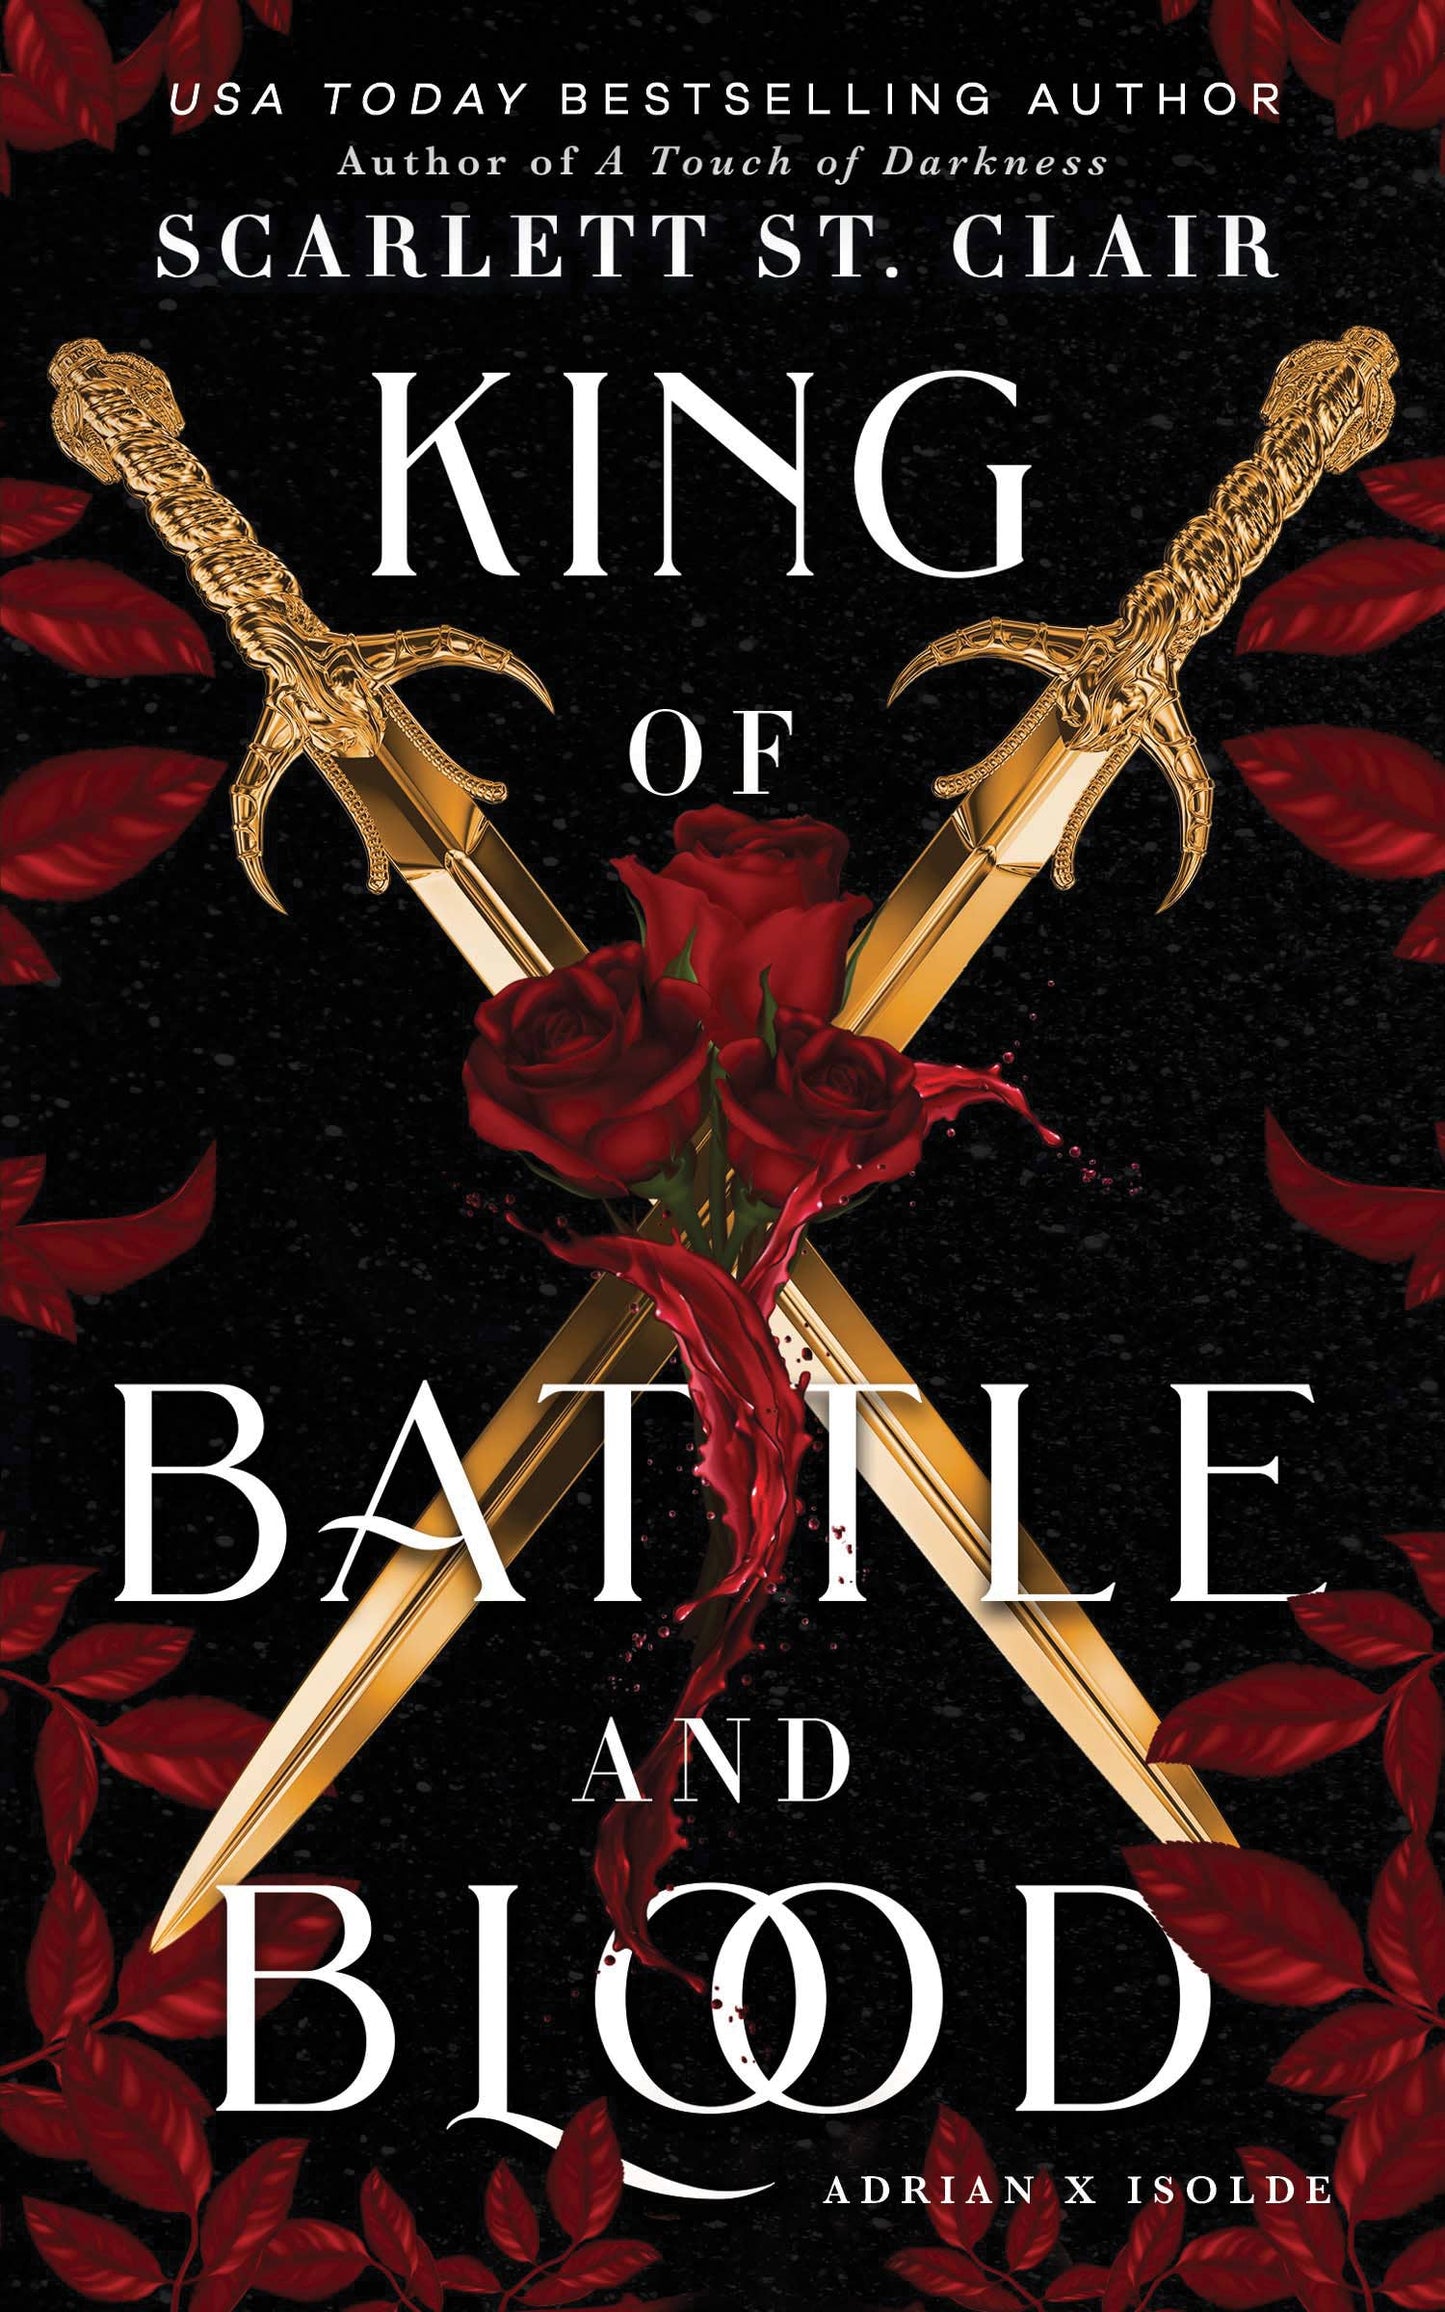 King of Battle and Blood by Scarlett St. Clair (Adrian X Isolde #1) (Paperback)